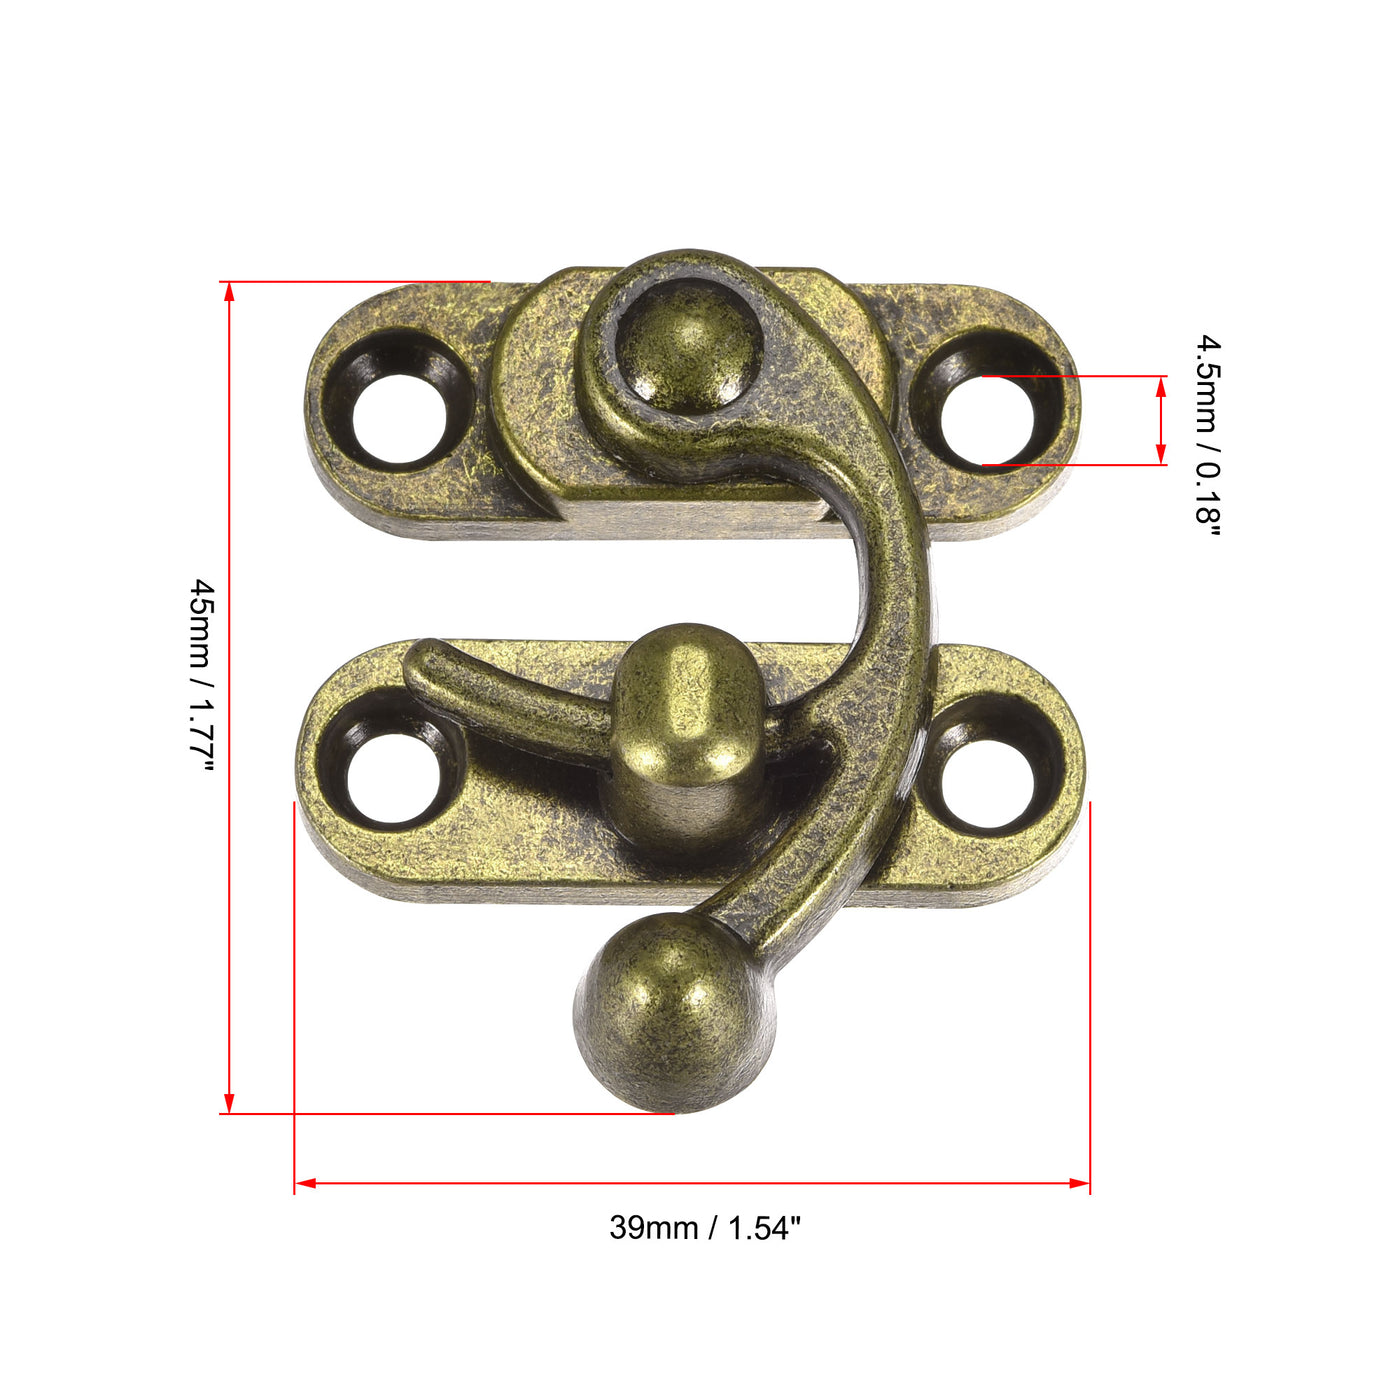 uxcell Uxcell Antique Vintage Lock Clasp Right Latch Hook Hasp 45mmx39mm Swing Arm Latch Bronze Tone 10 Pcs